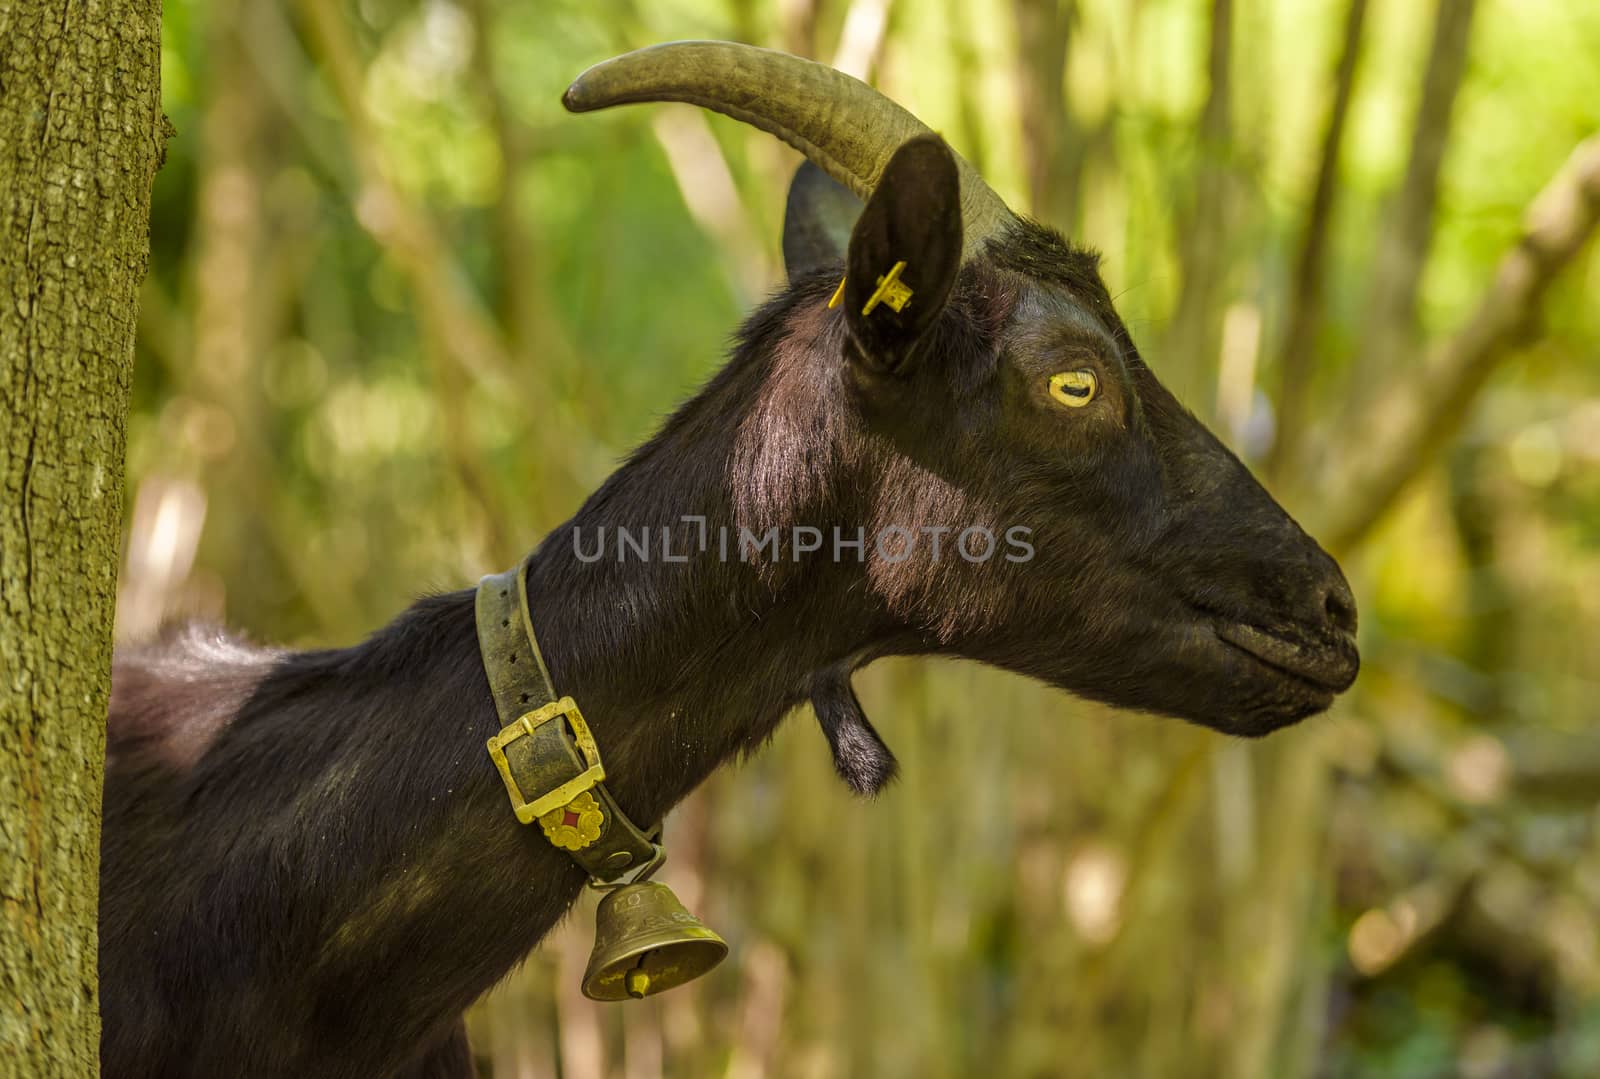 Domestic goat profile image with a bell at its neck, black fur and long horns, in a forest near the village Quinten, Switzerland